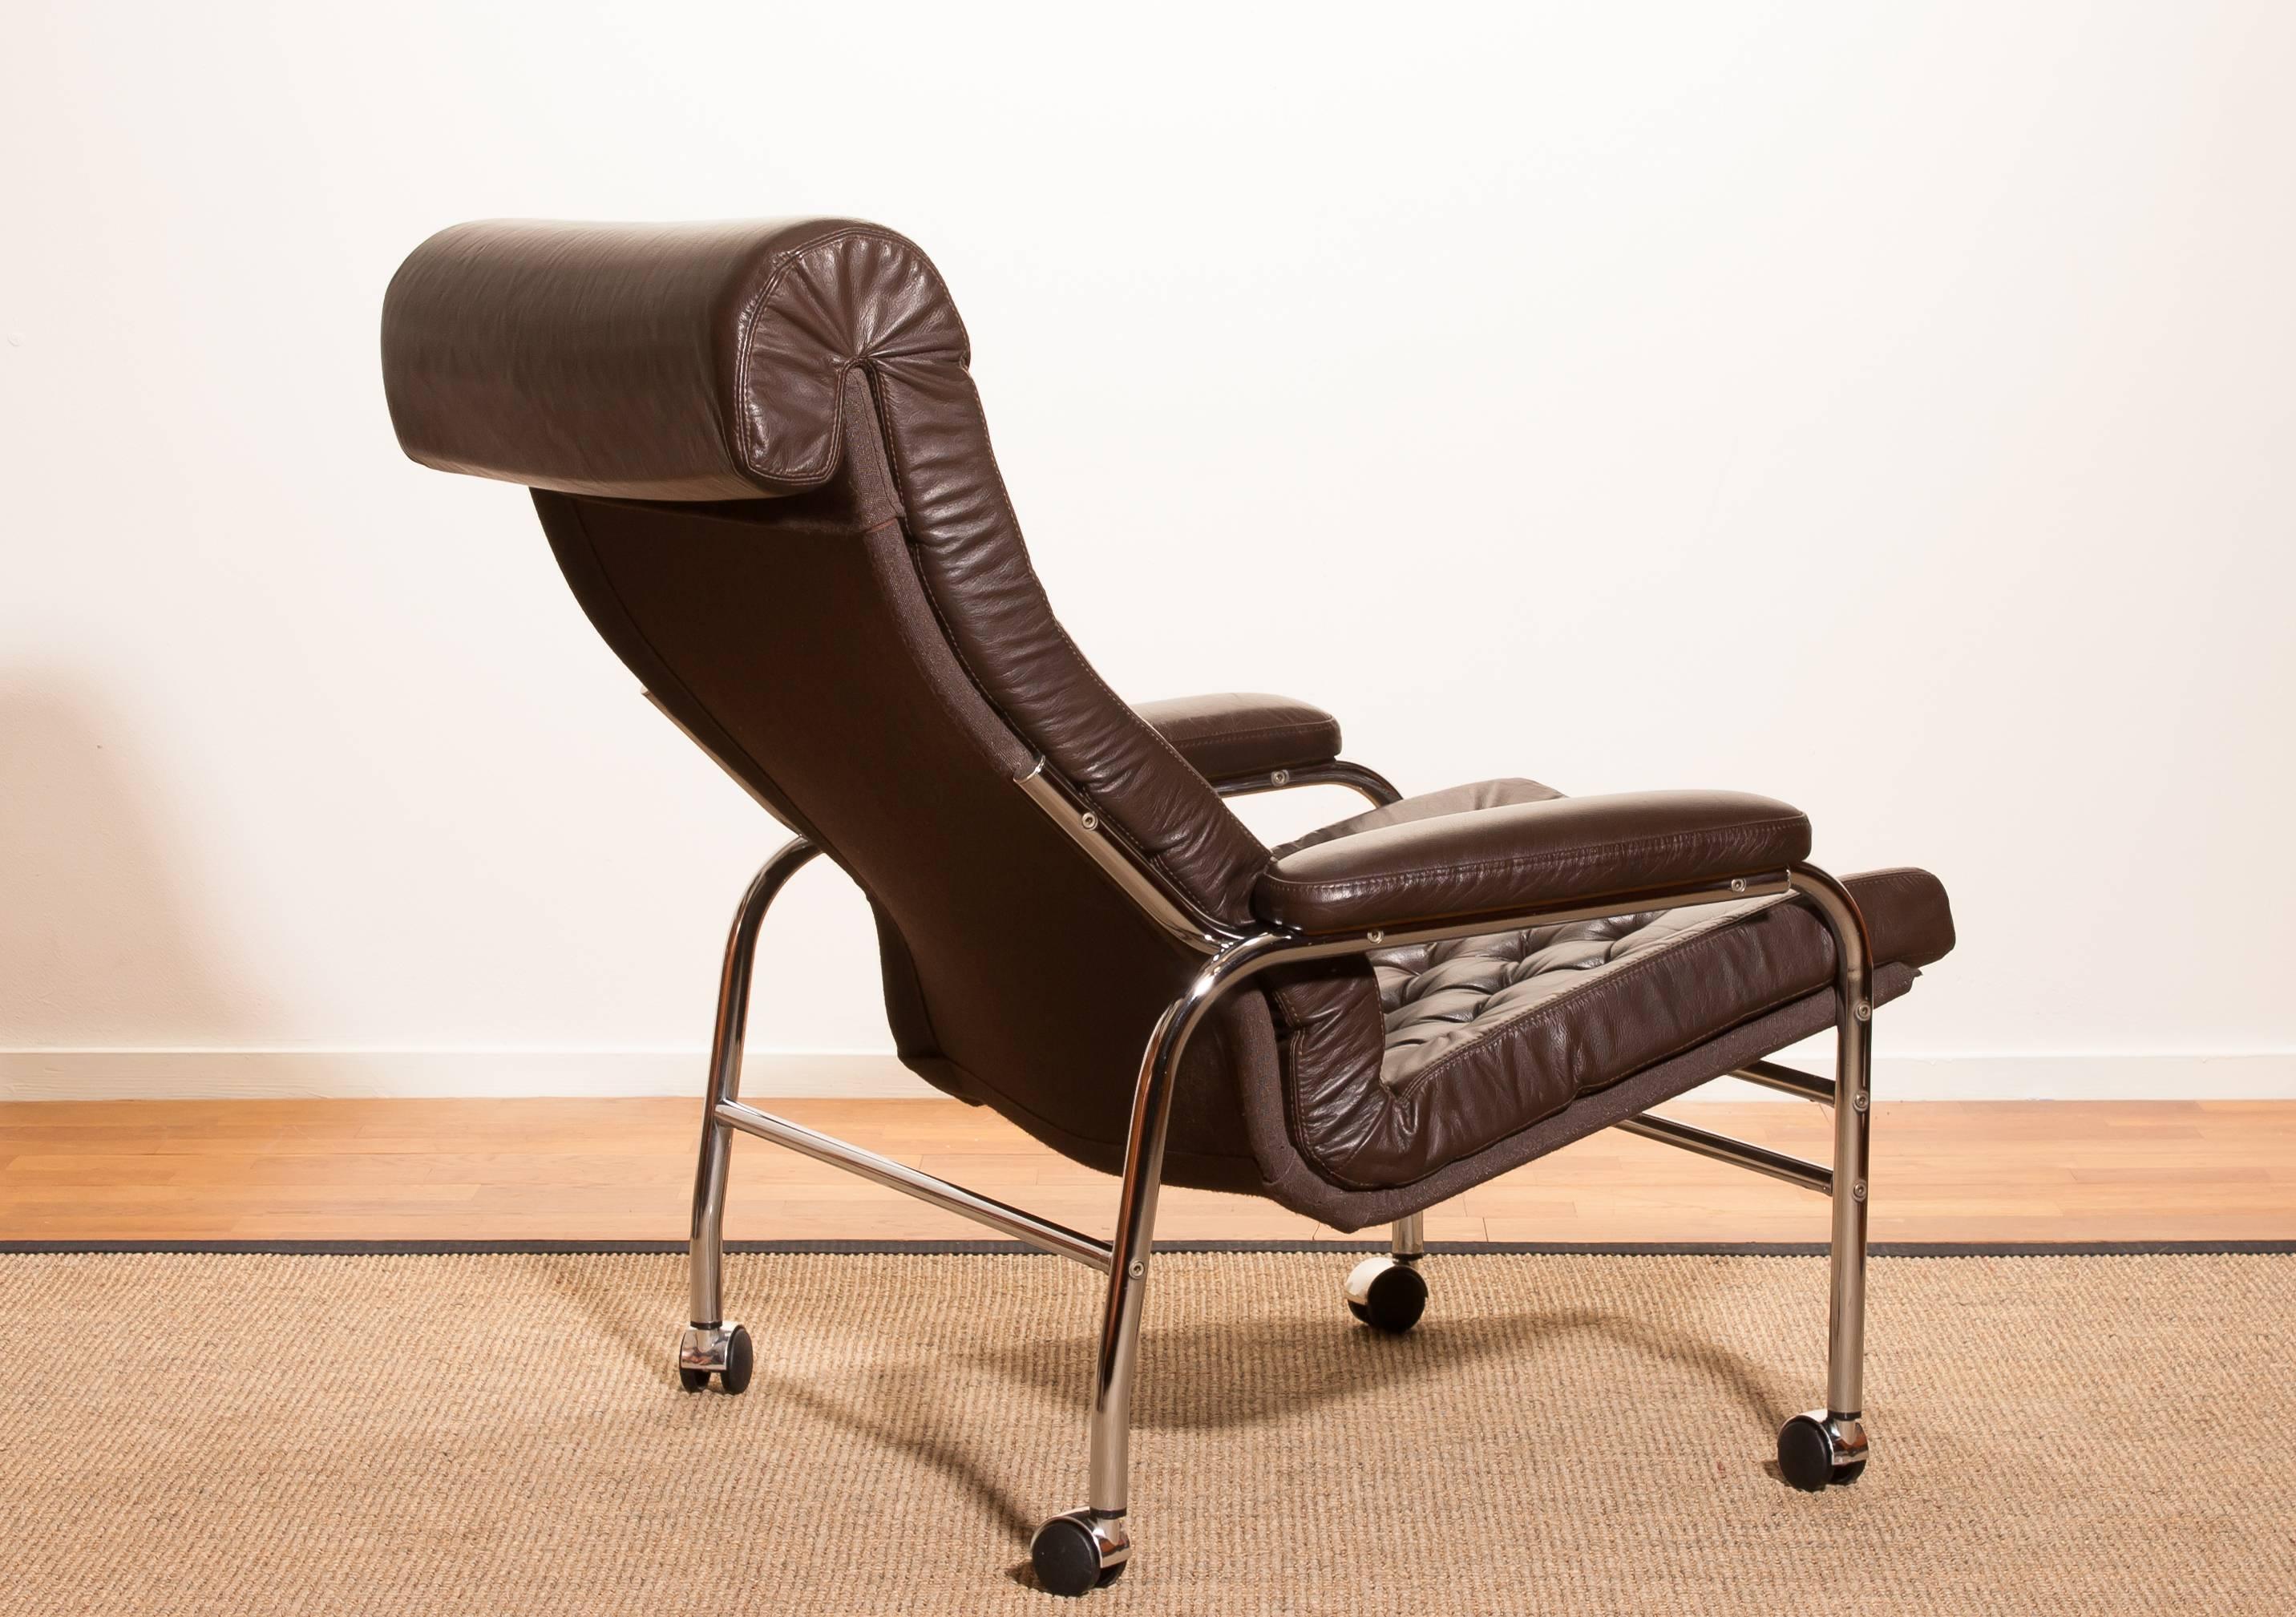 Beautiful and rare lounge chair designed by Noboru Nakamura for Ikea Sweden.
This chair has a dark brown leather seating on a chromed tubular wheeled frame.
It is in a mint condition.
Period 1970s
Dimensions: H 90 cm, W 78 cm, D 93 cm, SH 40 cm.